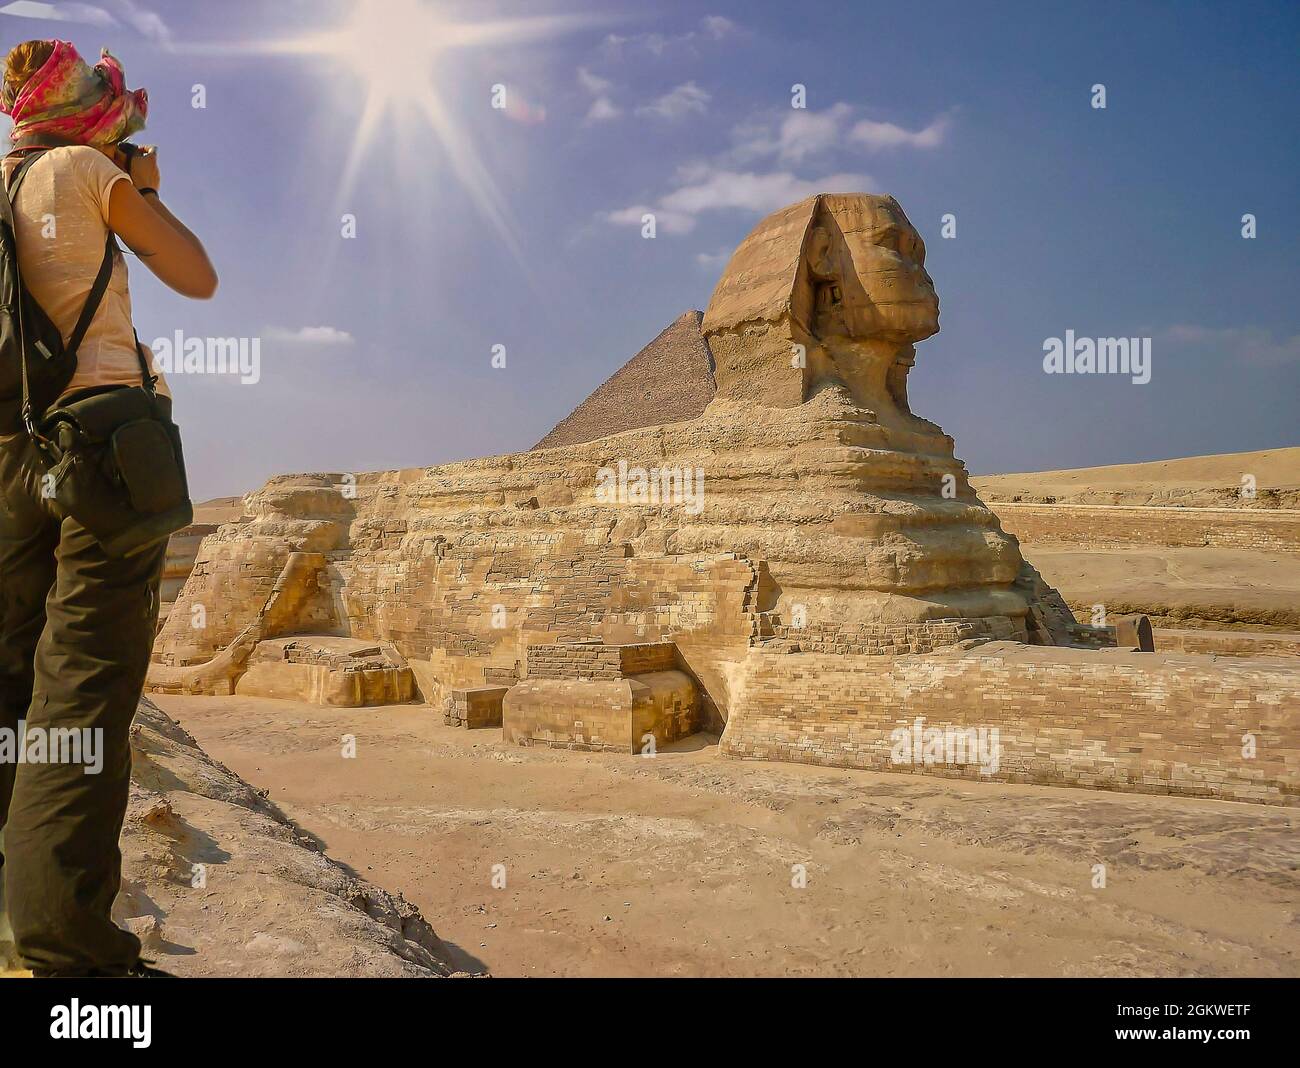 Sphinx .Photographer taking a photo of the Sphinx. Stock Image. Stock Photo